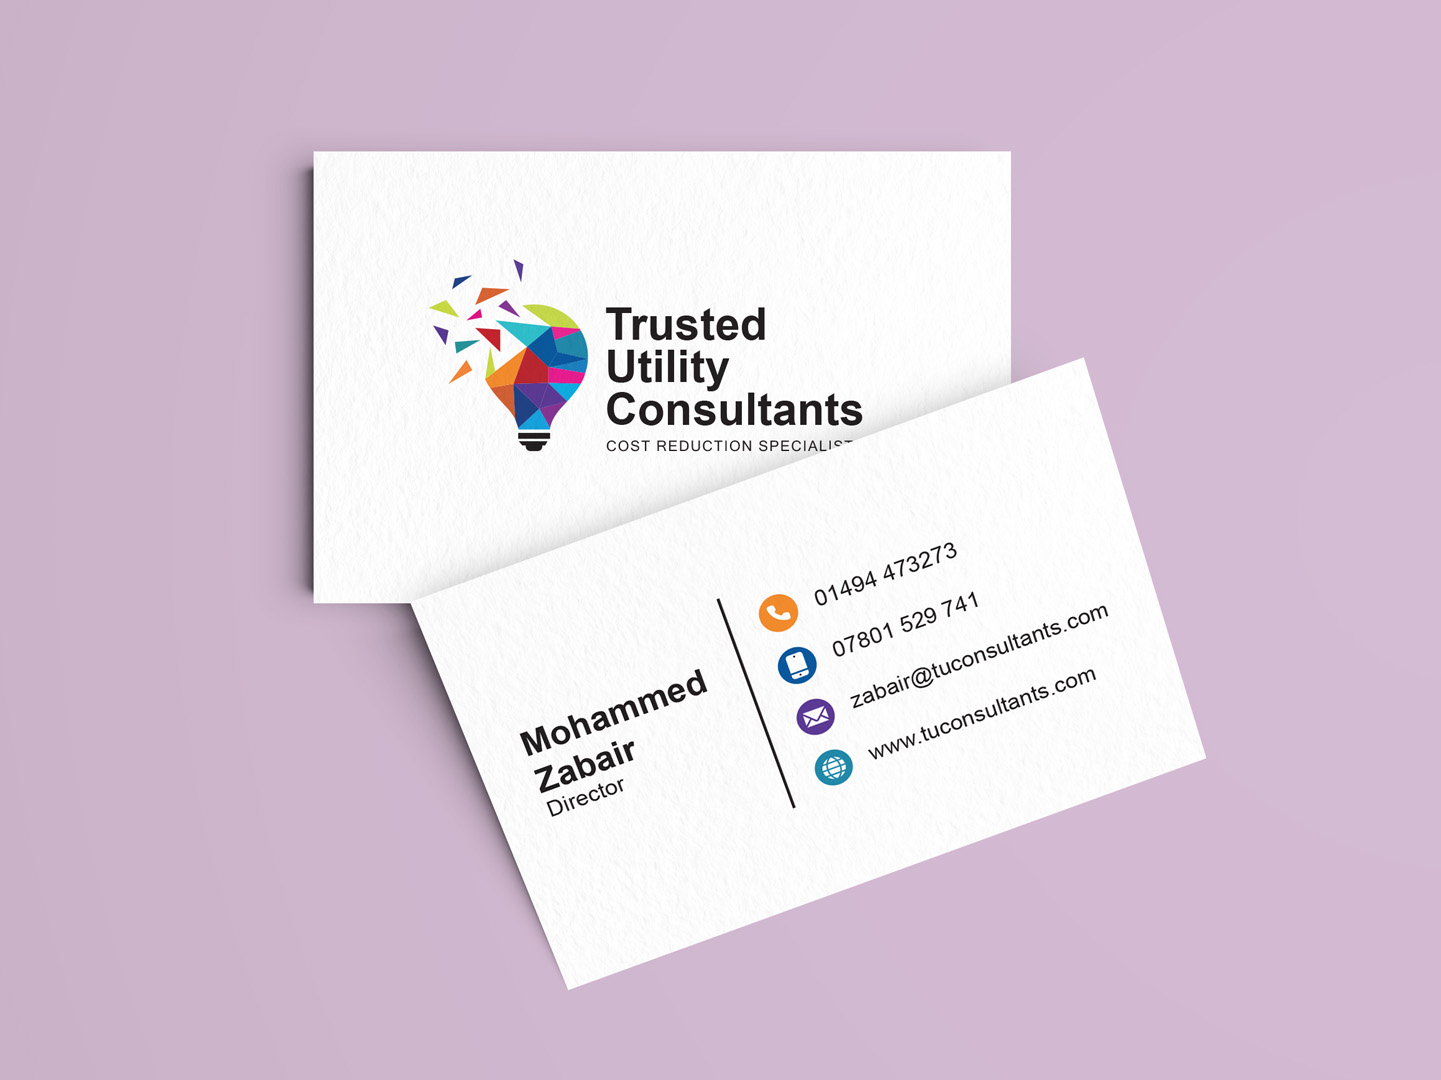 Simple business cards for trusted utility consultants